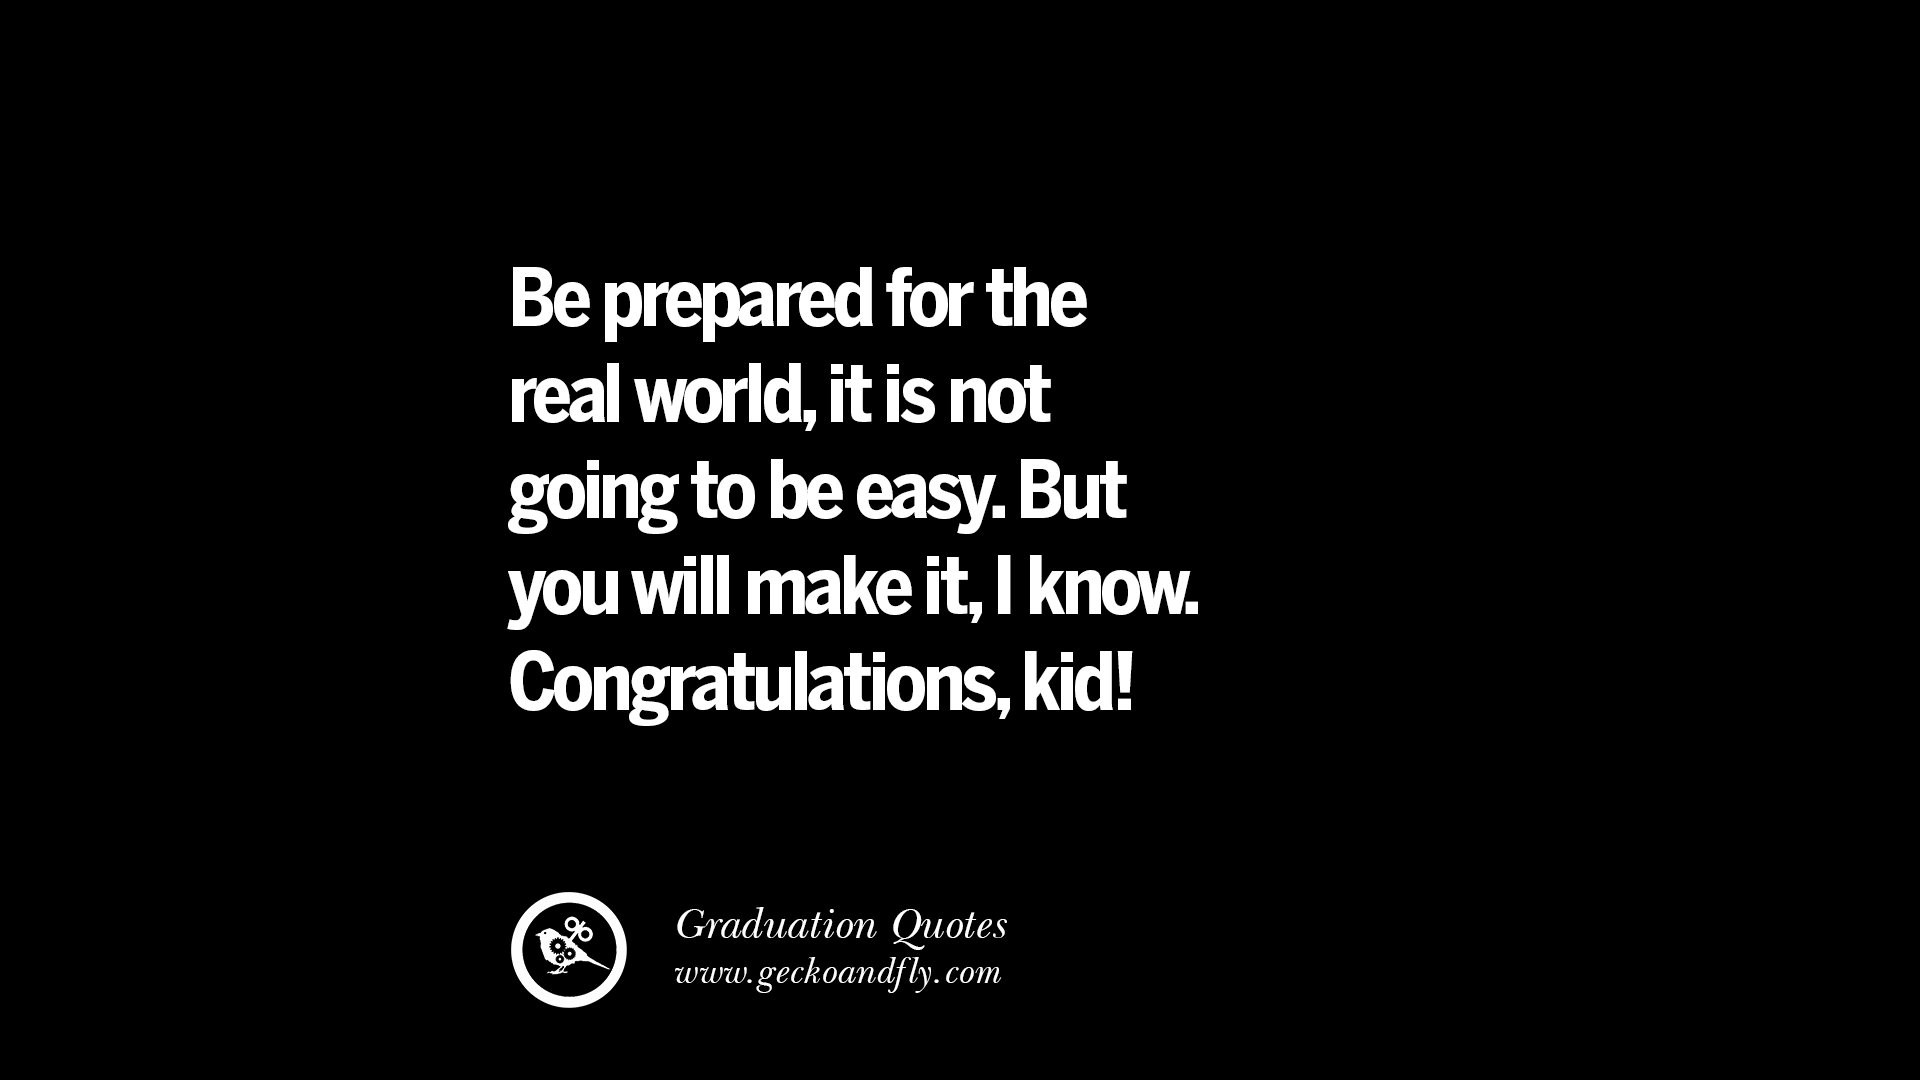 Quotes For High School Graduations
 30 Inspirational Quotes on Graduation For High School And